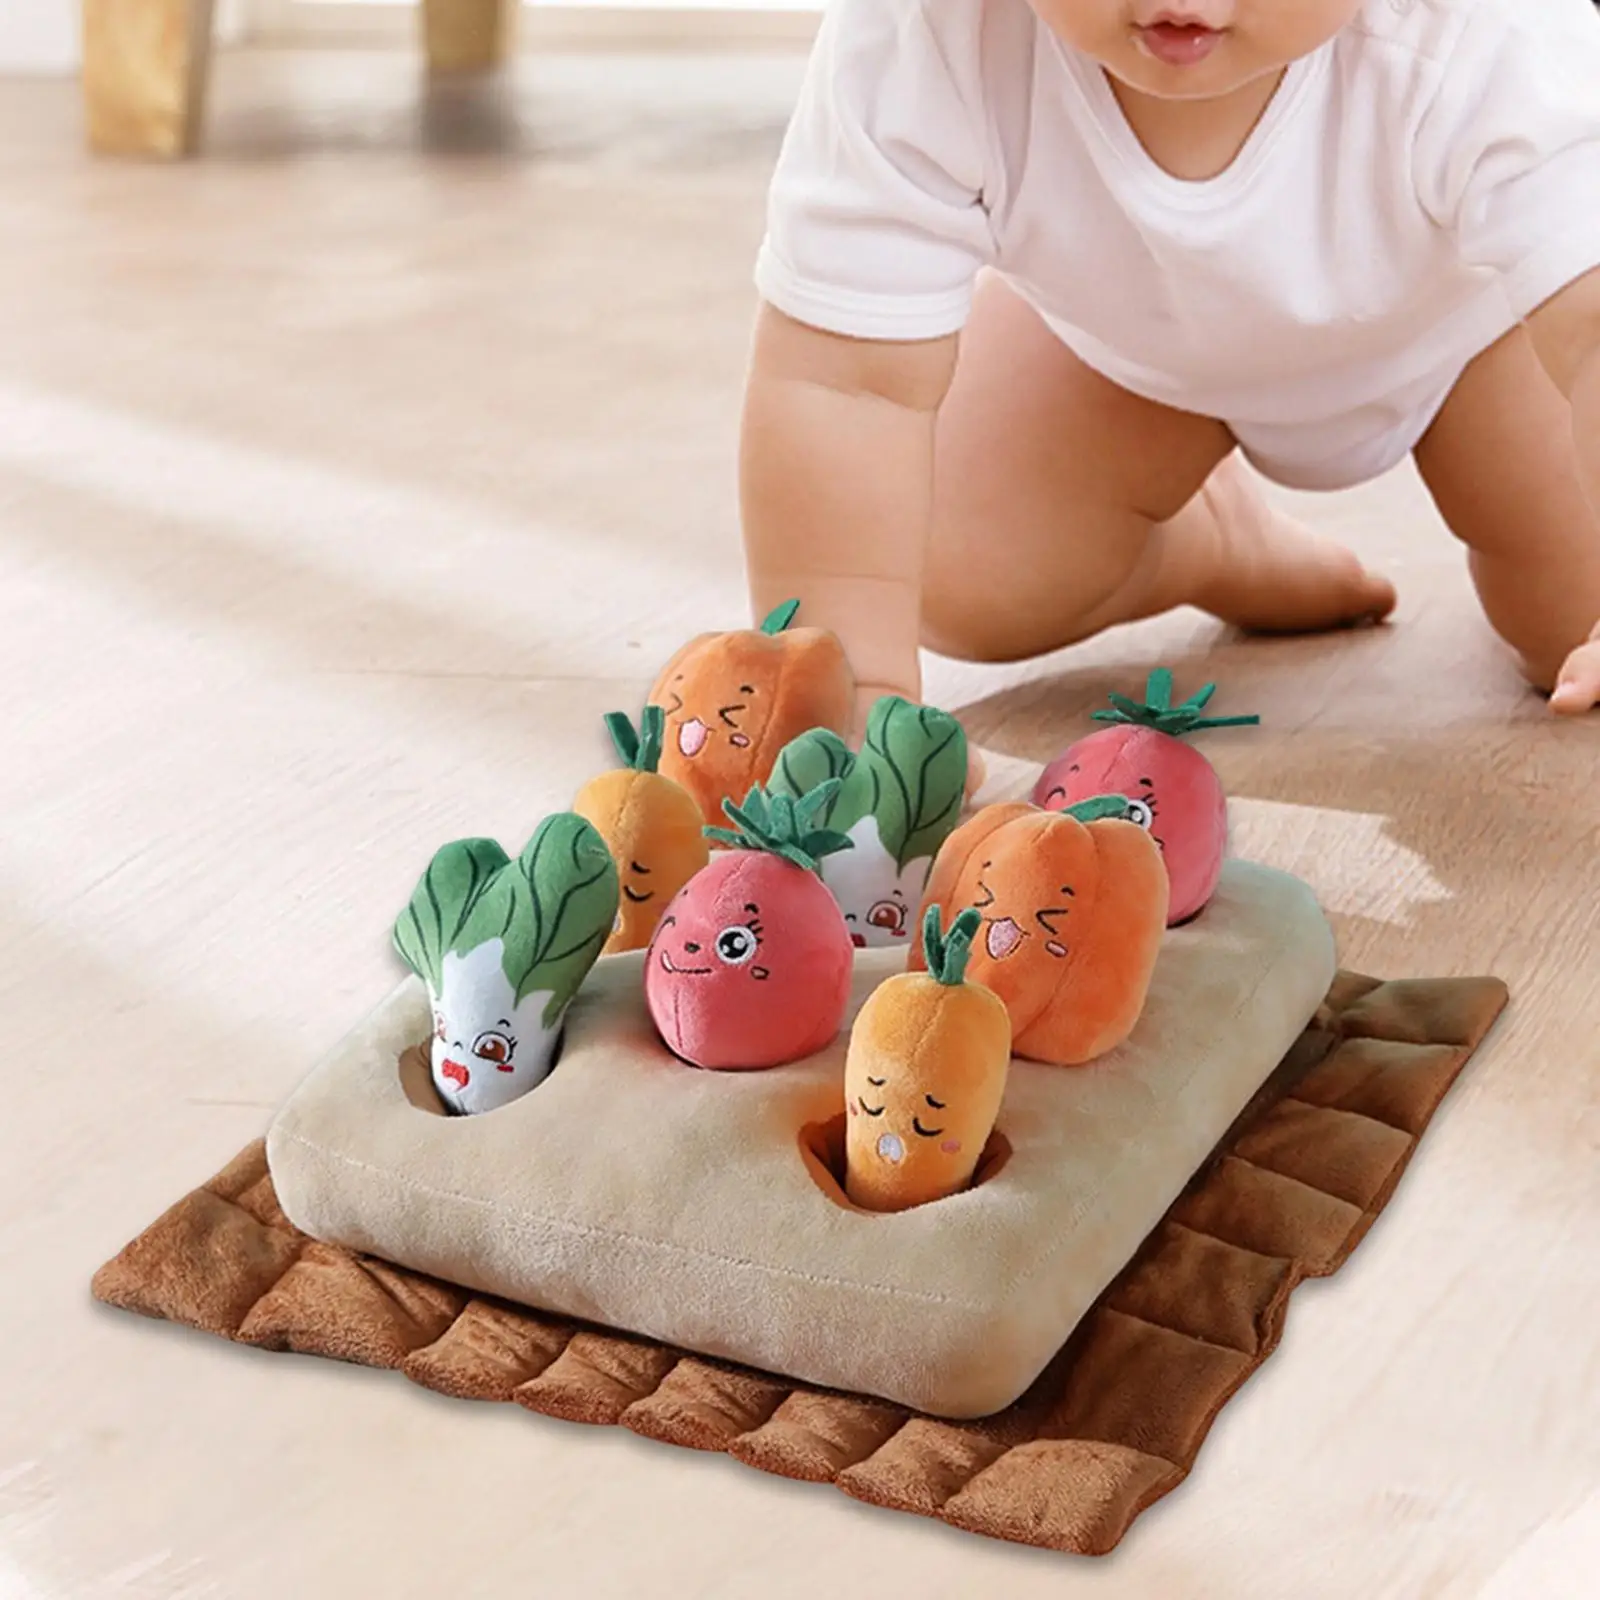 Toddlers Montessori Toys Vegetable Plush Toy for Developing Hand Eye Cooperation Accessories Colorful Measure 14.6x13.8inch